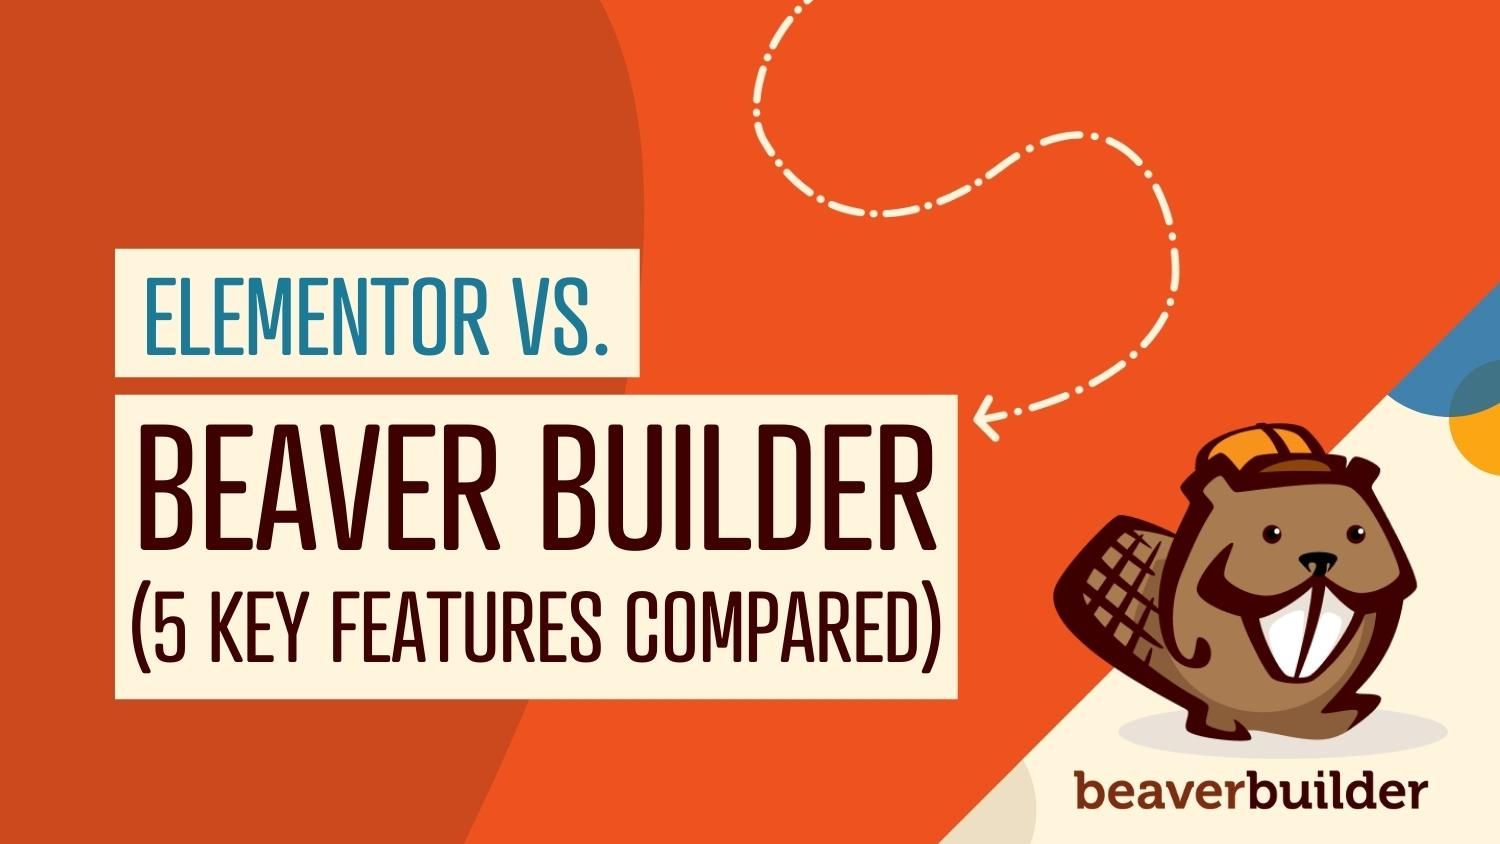 Beaver Buider vs Elementor: 5 key features compared